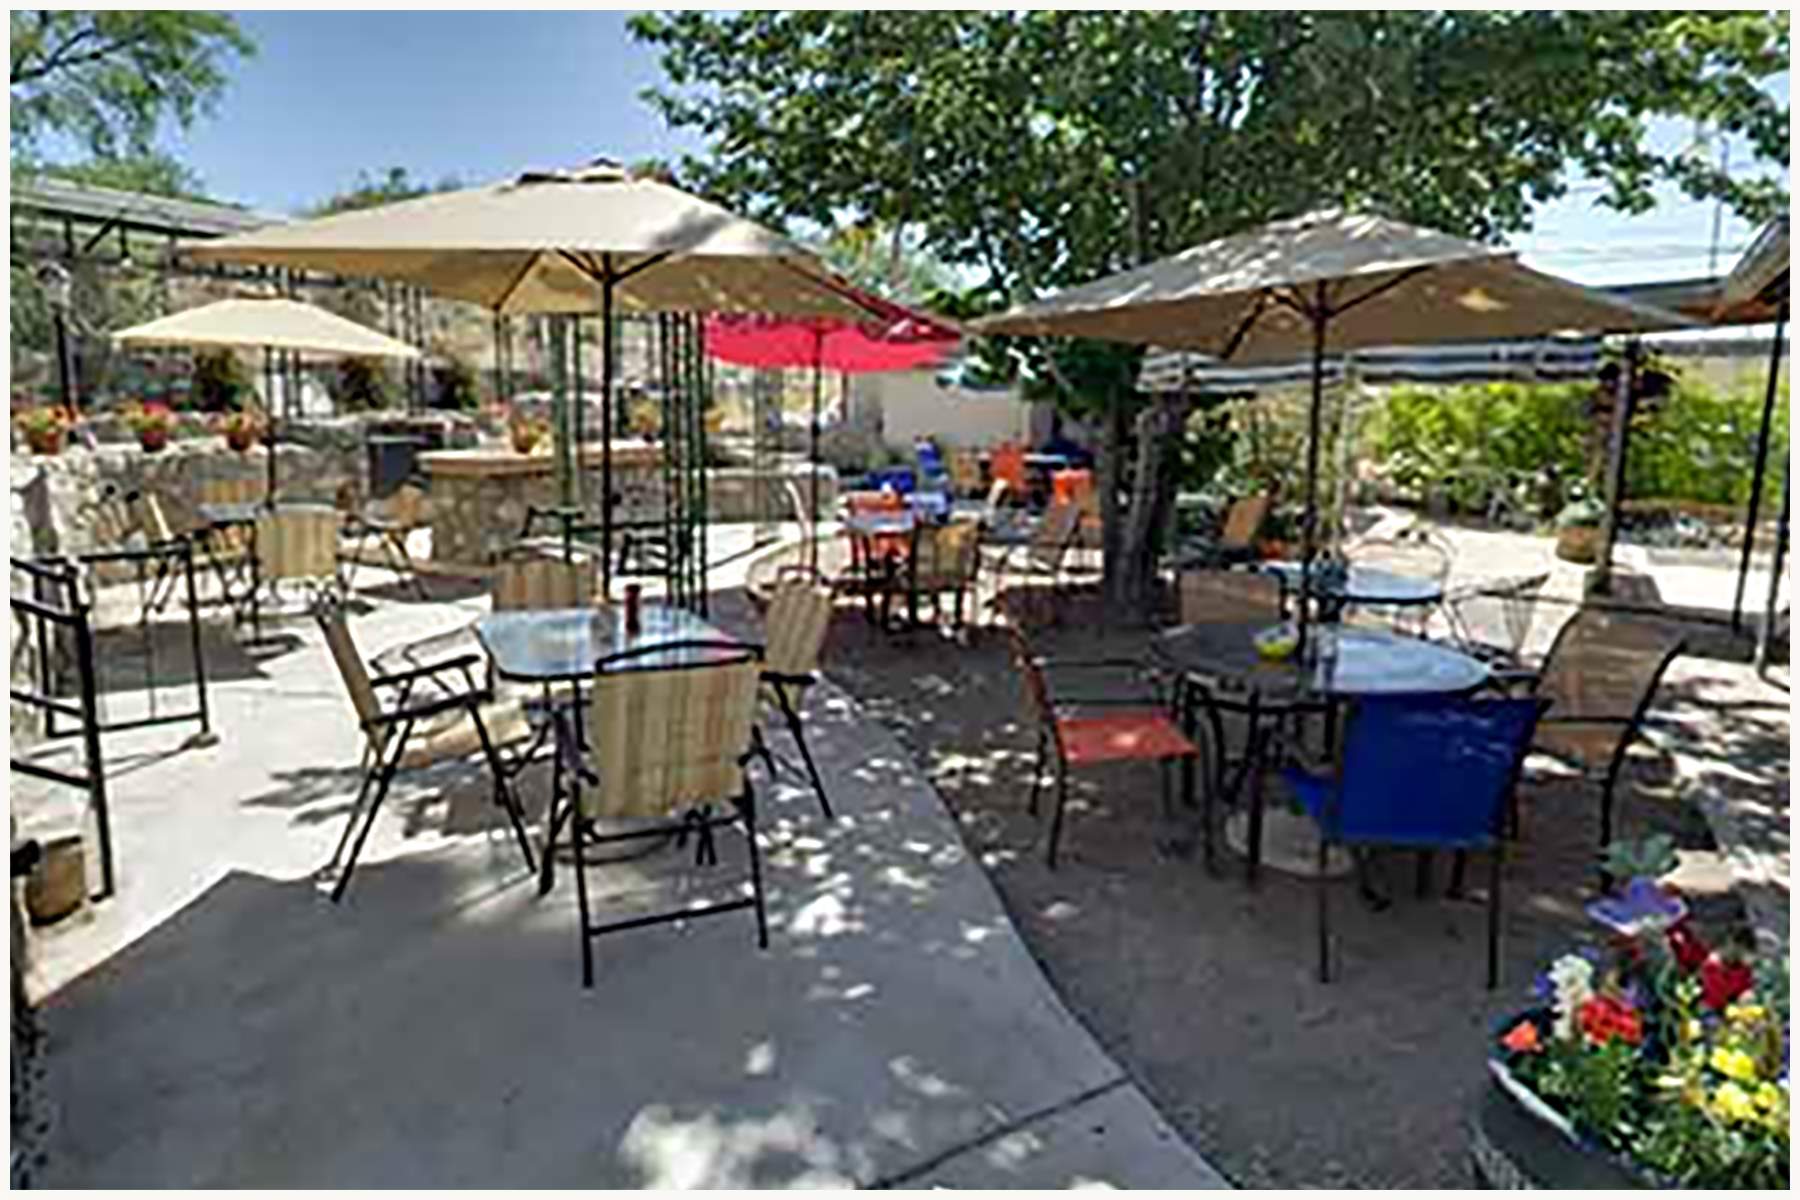 The Oracle Patio Cafe and Market